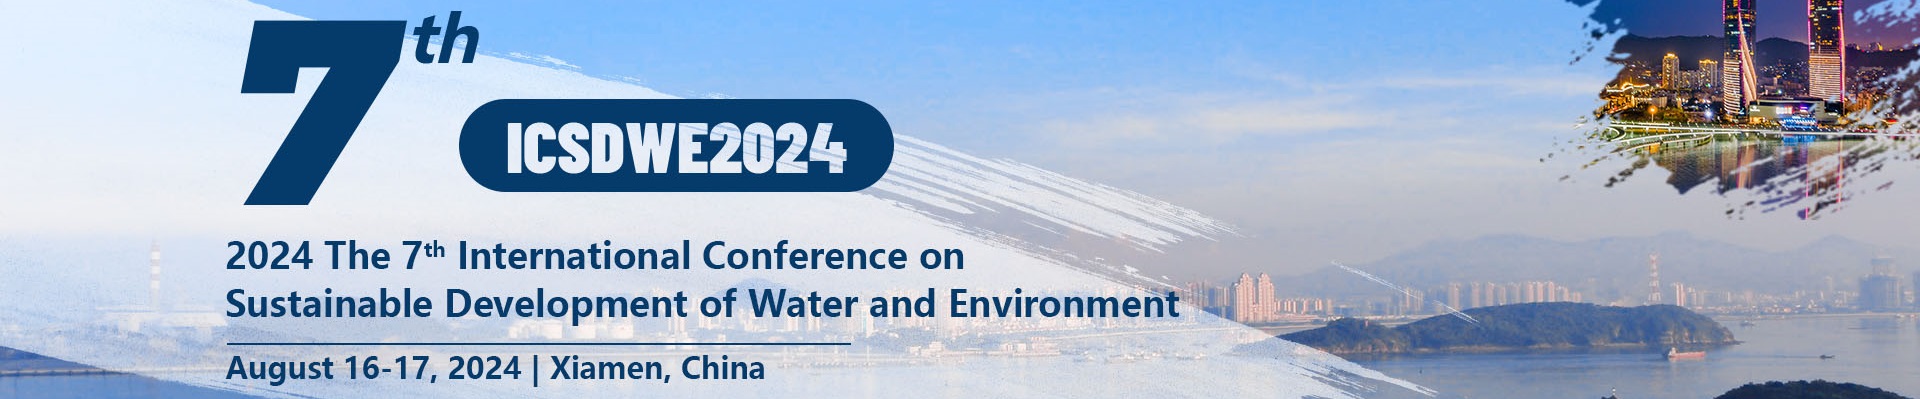 2024 The 7th International Conference on Sustainable Development of Water and Environment